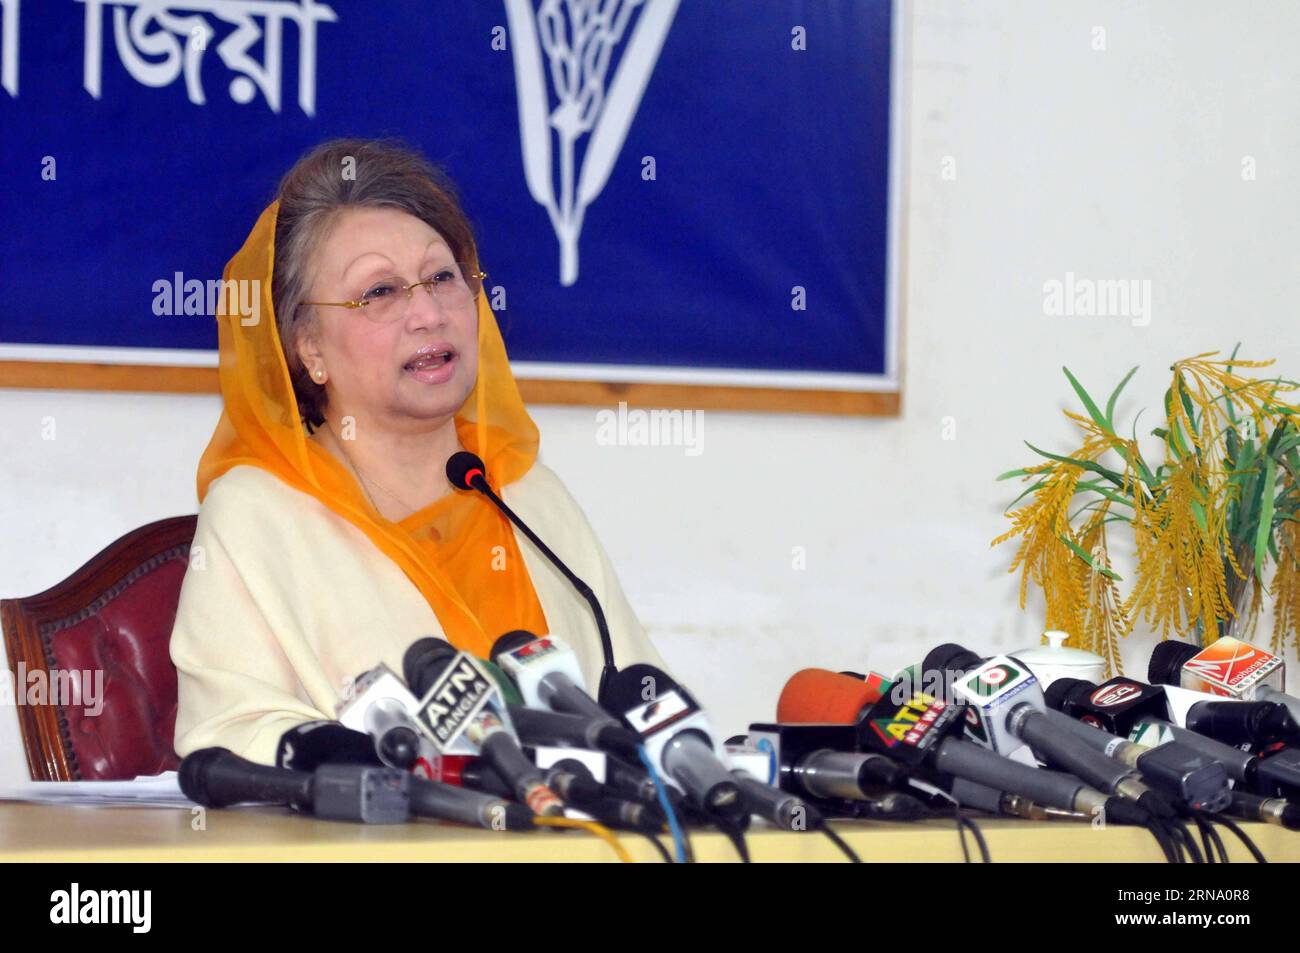 (151228) -- DHAKA, Dec. 28, 2015 -- Bangladeshi former Prime Minister Khaleda Zia speaks during a press conference in Dhaka, Bangladesh, Dec. 28, 2015. Bangladeshi former Prime Minister Khaleda Zia on Monday once again called for the deployment of the army to supervise the local body polls. ) BANGLADESH-DHAKA-POLITICS-KHALEDA ZIA-PRESS CONFERENCE SharifulxIslam PUBLICATIONxNOTxINxCHN   151228 Dhaka DEC 28 2015 Bangladeshi Former Prime Ministers Khaleda Zia Speaks during a Press Conference in Dhaka Bangladesh DEC 28 2015 Bangladeshi Former Prime Ministers Khaleda Zia ON Monday Once Again called Stock Photo